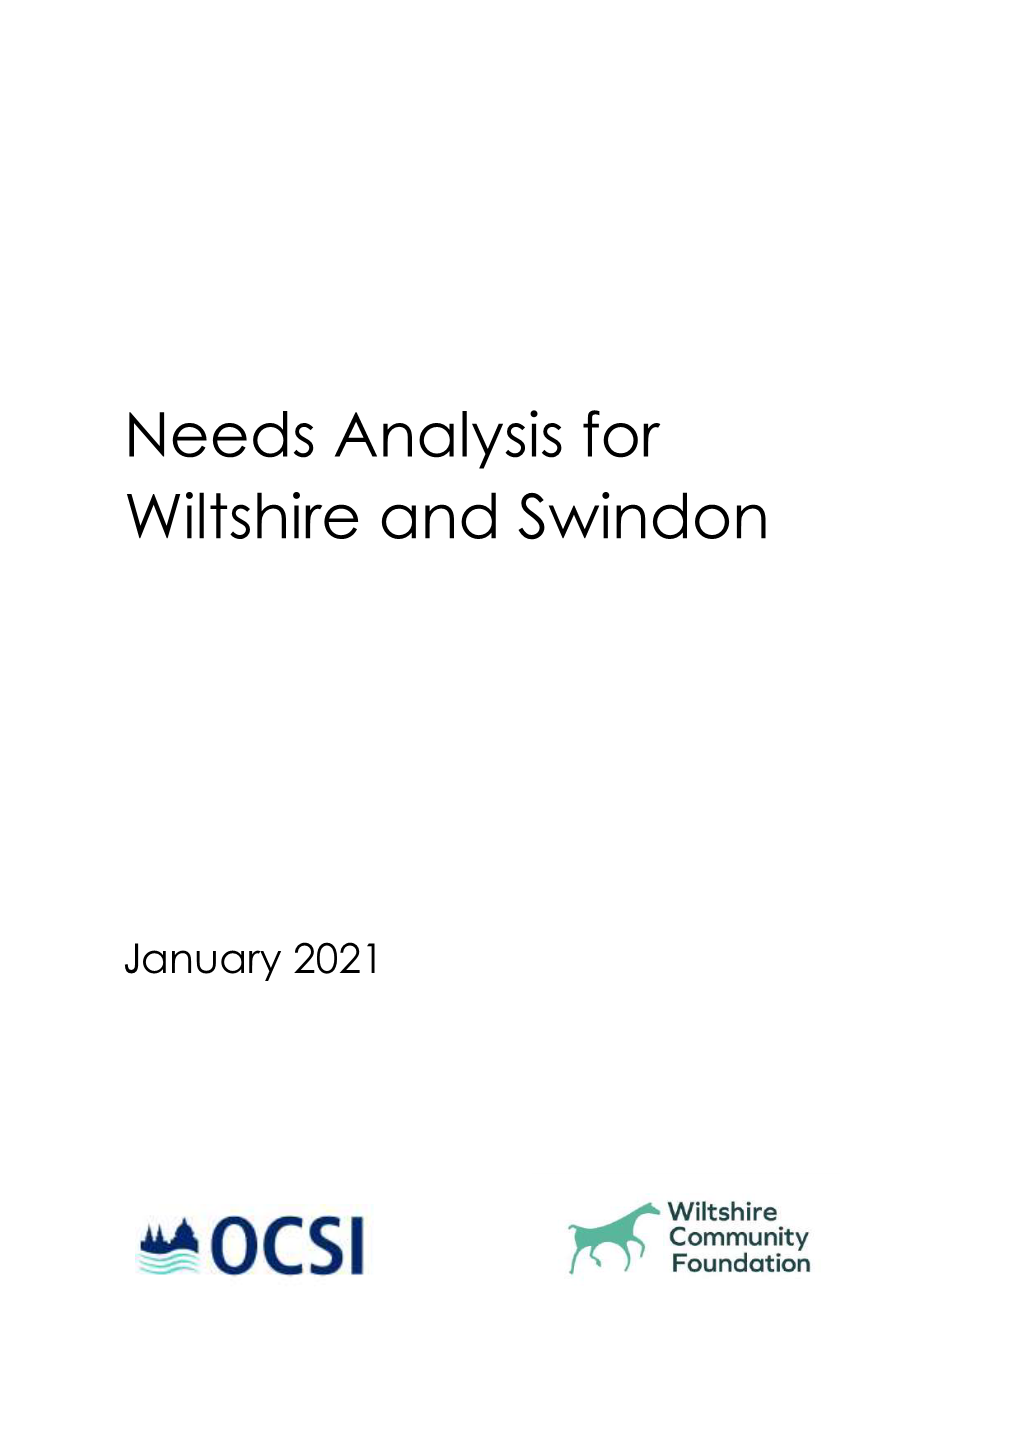 Needs Analysis for Wiltshire and Swindon